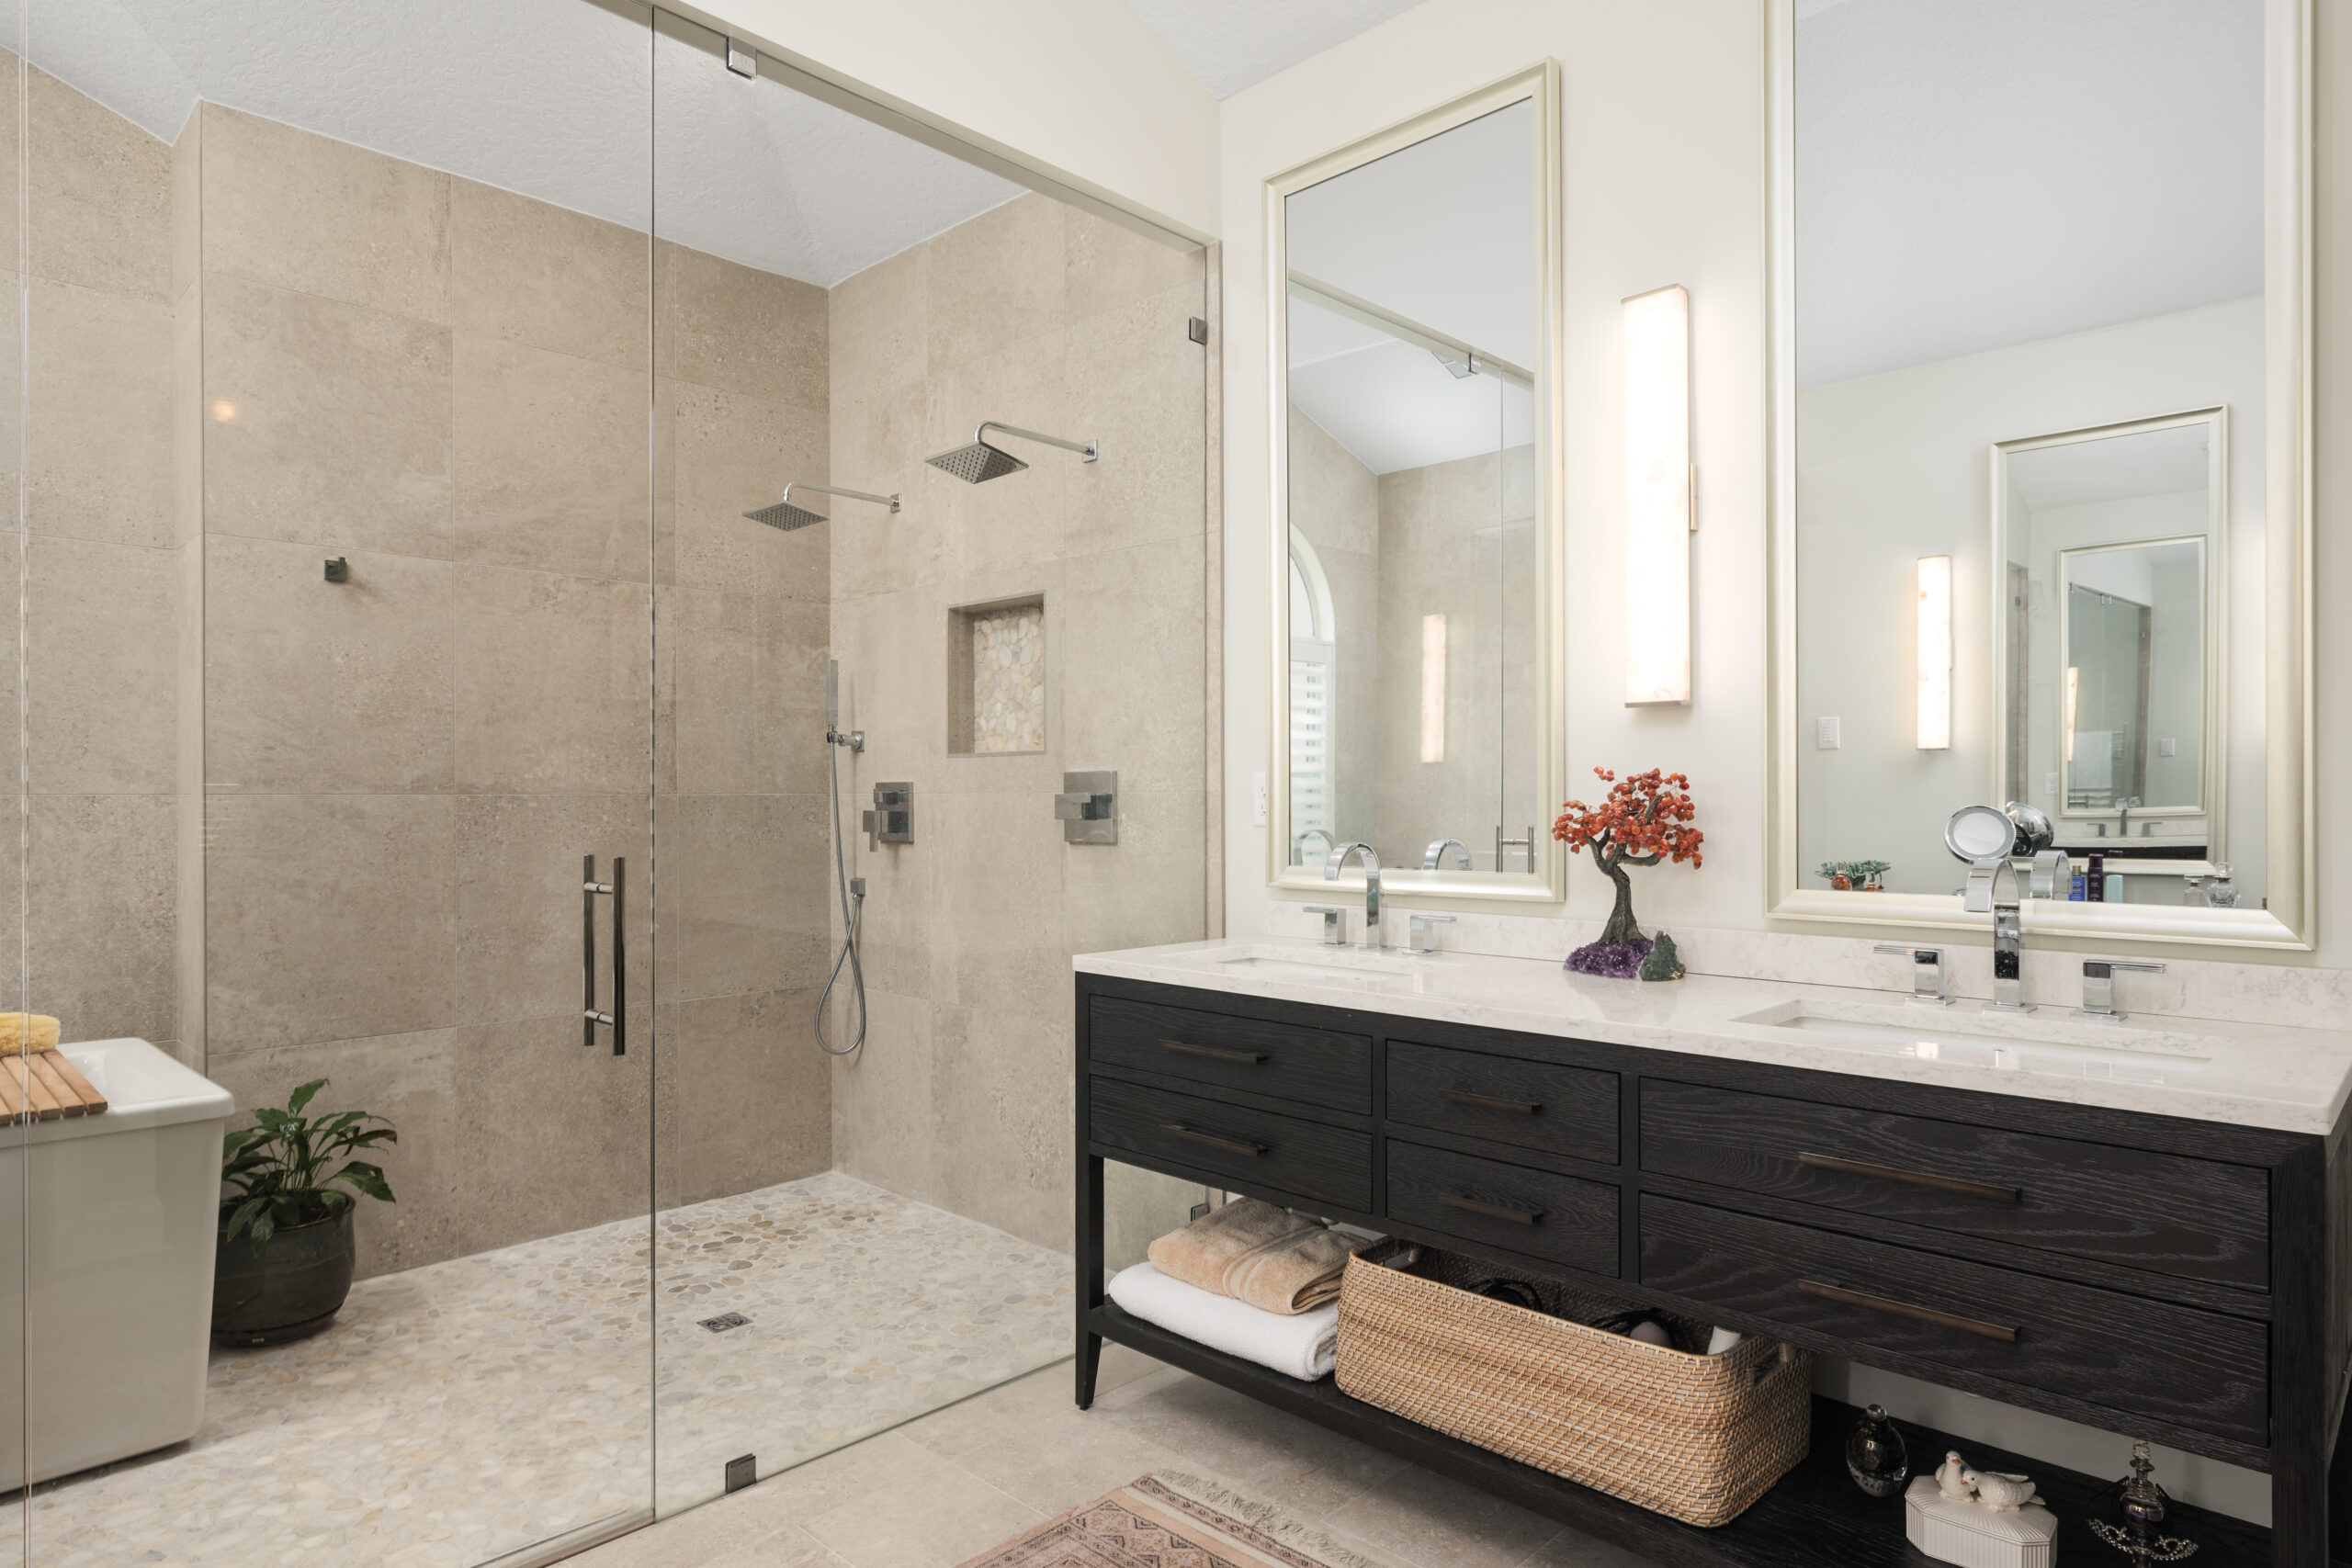 Double sink vanity with view of double head shower